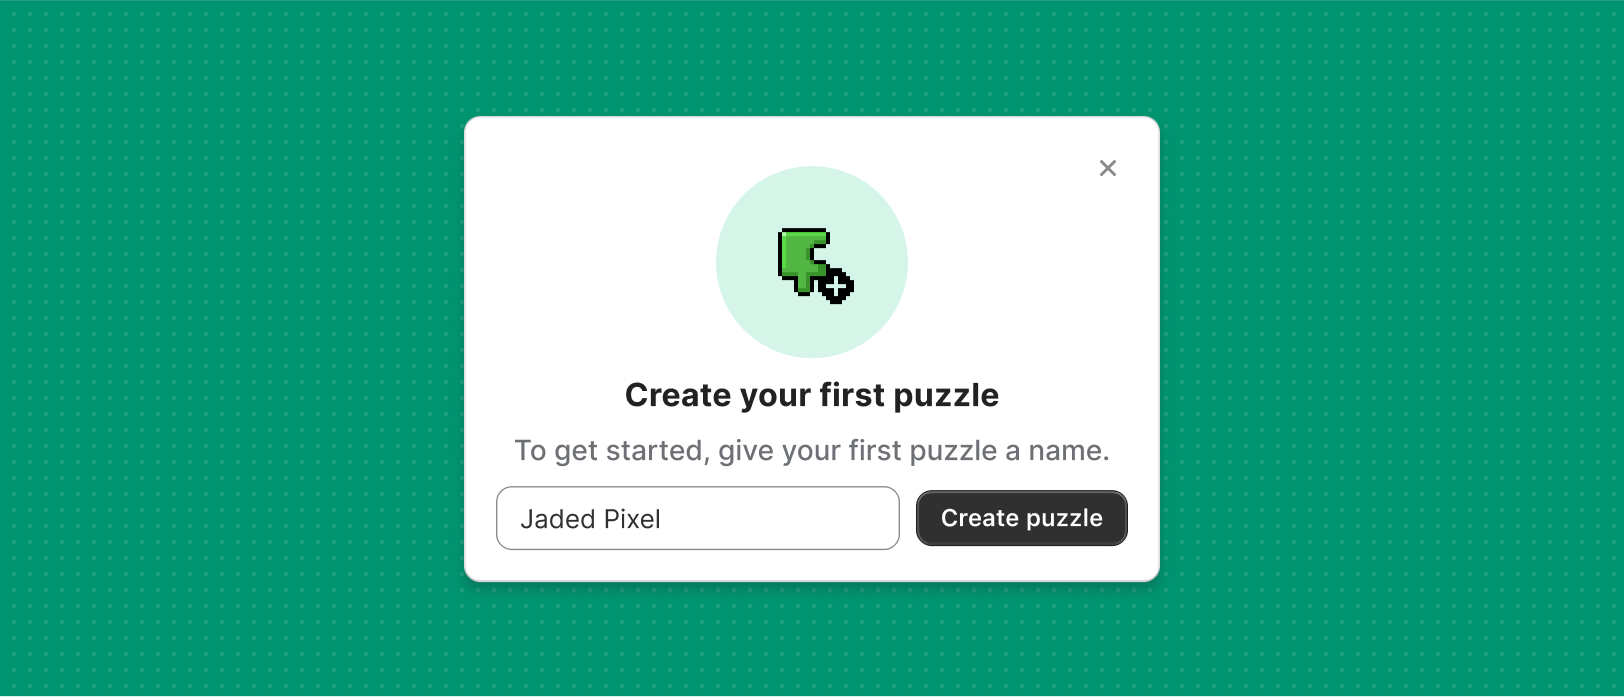 An onboarding step that asks the merchant to name their first puzzle.